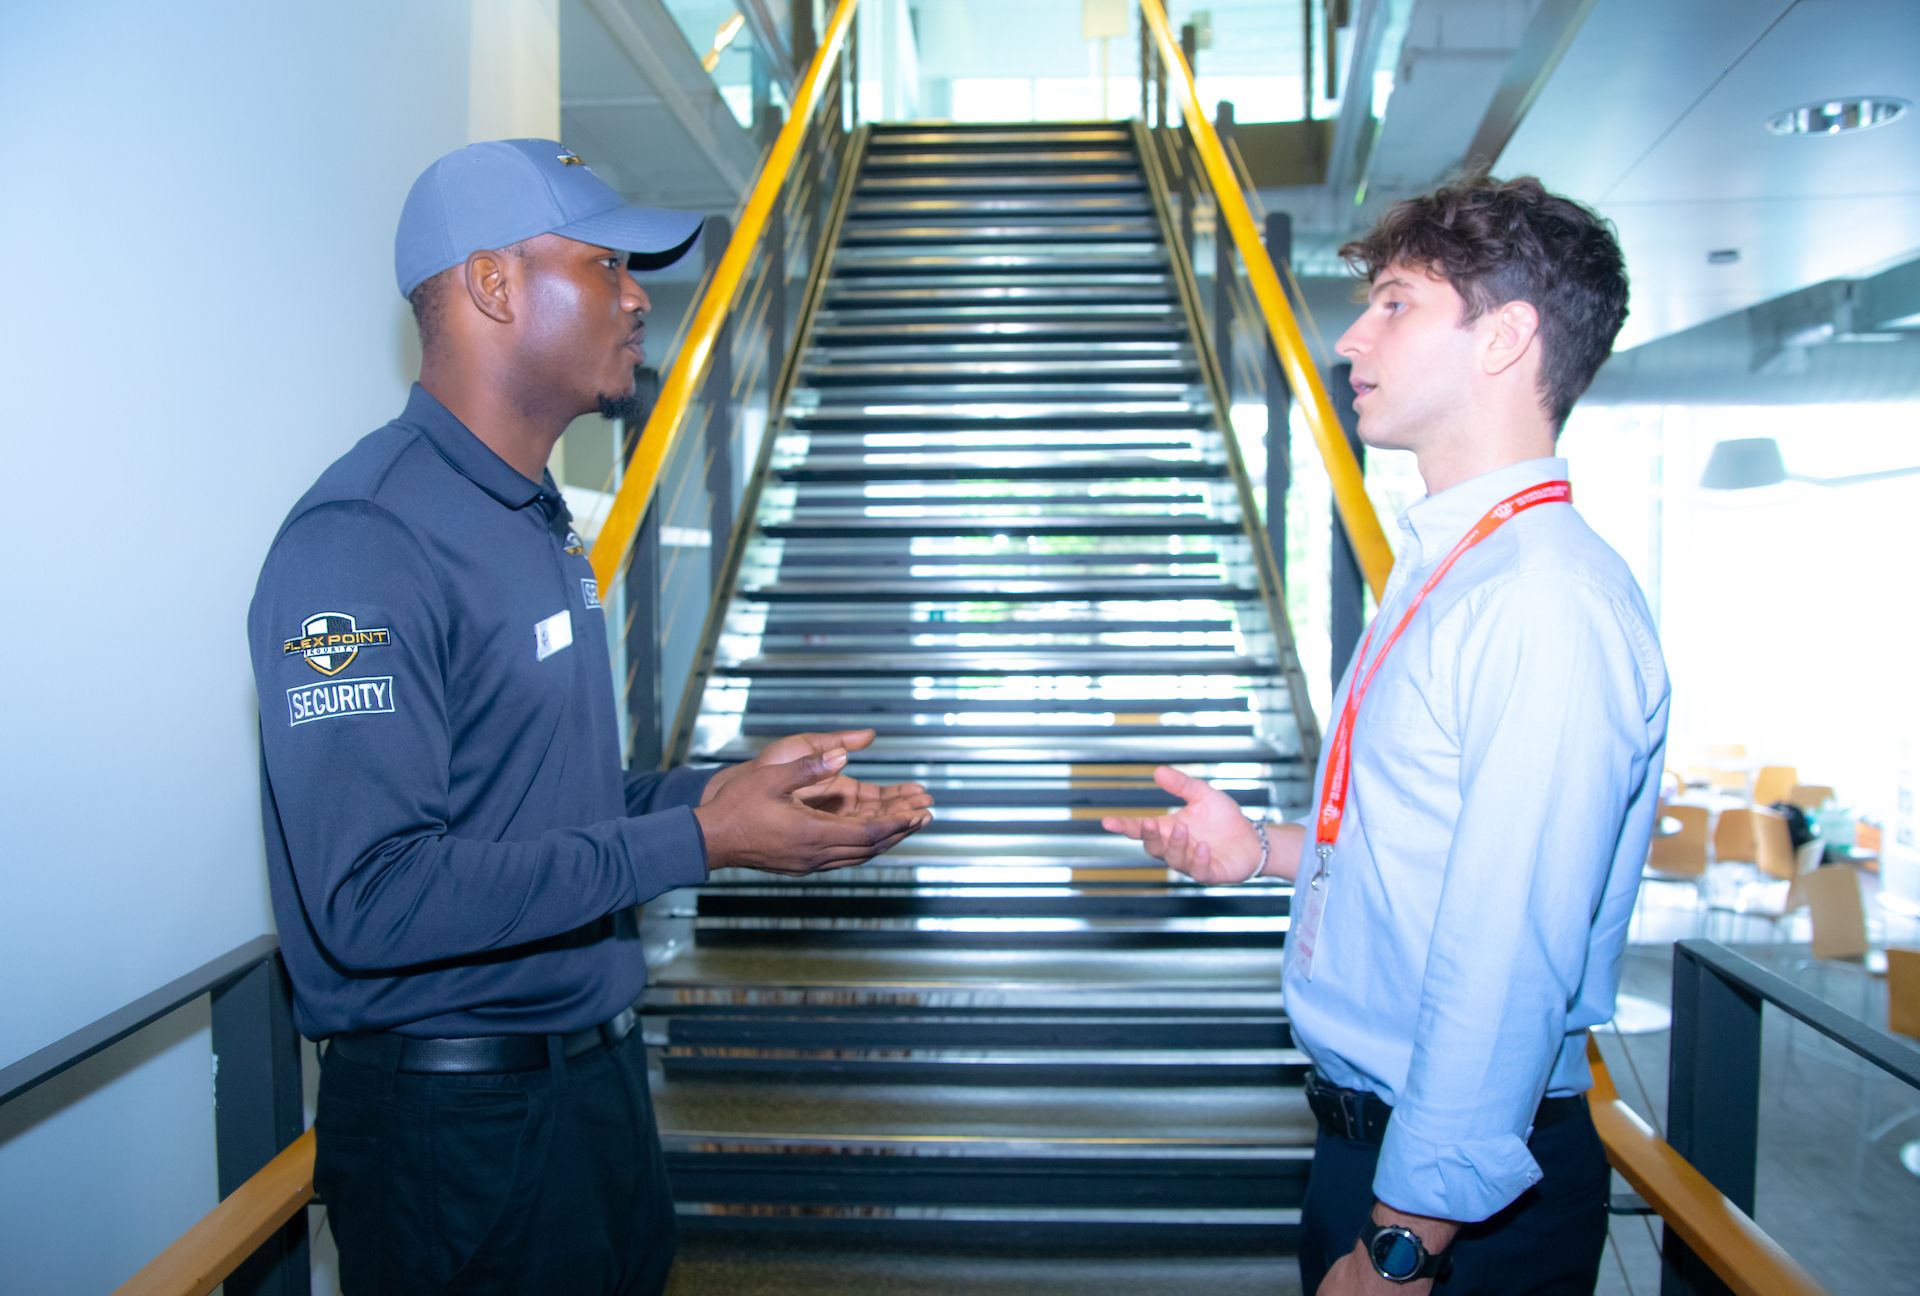 A male Flex Point Security guard interacting with an employee next to a set of stairs in a corporate office